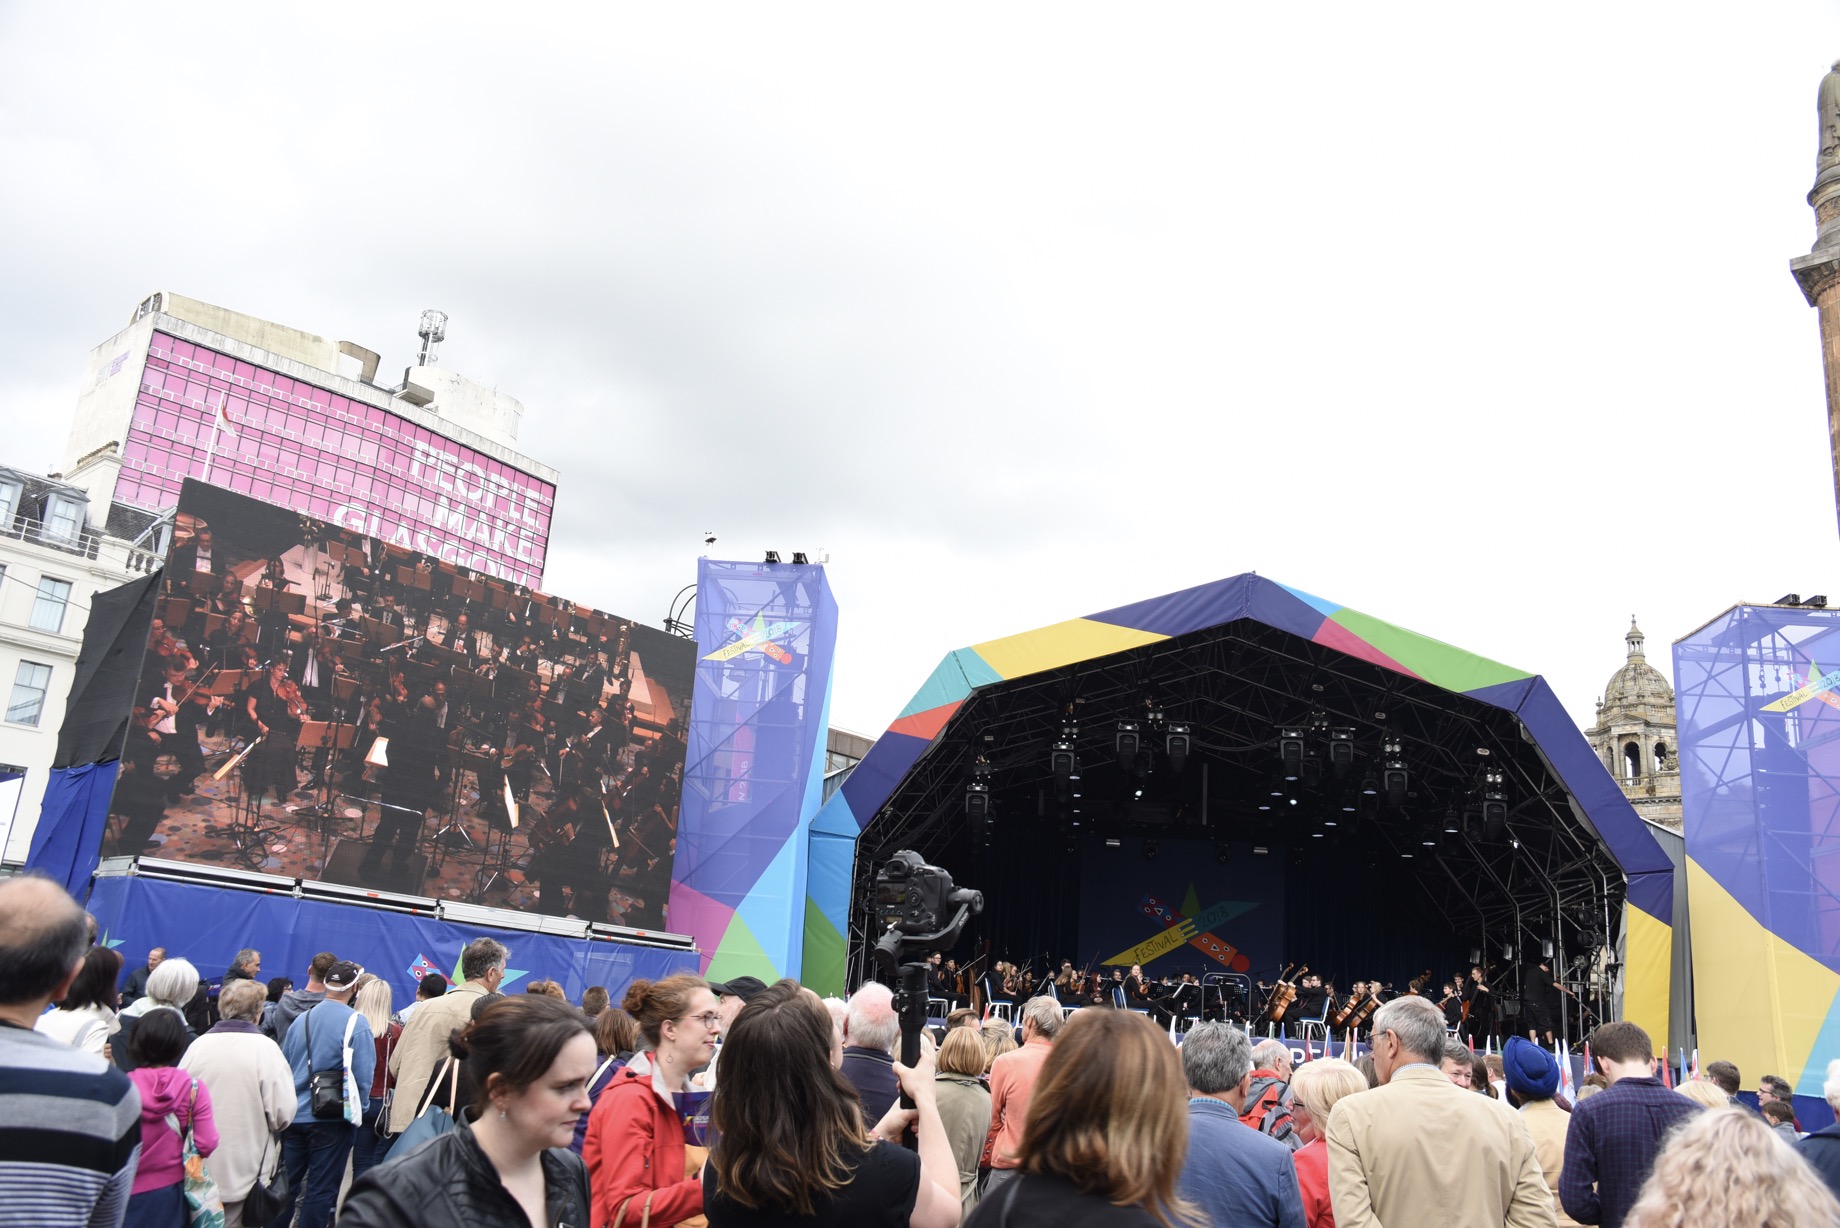 Fantastic audinece in Glasgow\'s George Square for the special Gala Concert with live link to Berlin. Part of Festival 2018, Glasgow\'s cultural showcase that ran alongside the European Championship Games, August 2018.